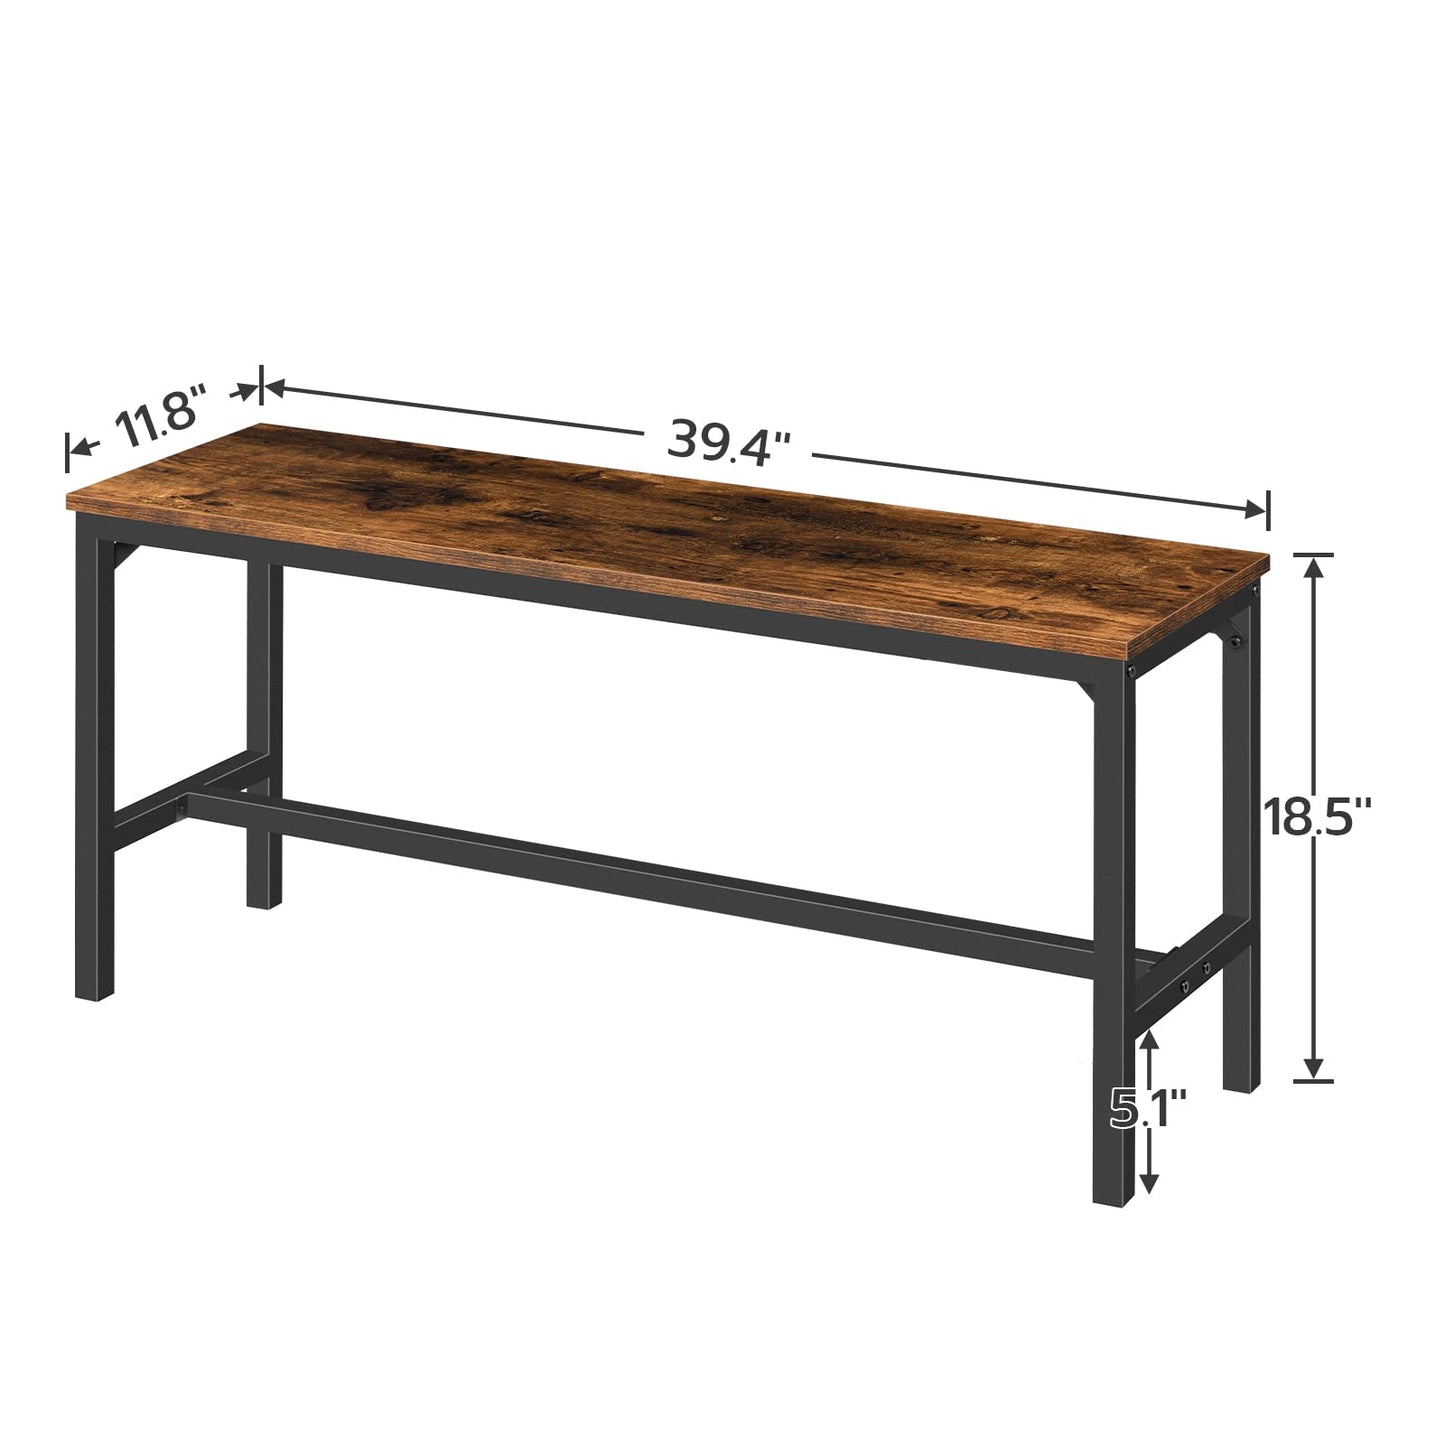 HOOBRO Dining Benches, Pair of 2 Kitchen Benches, Industrial Table Benches, Wooden Indoor Benches, Durable and Stable, for Dining Room, Kitchen,